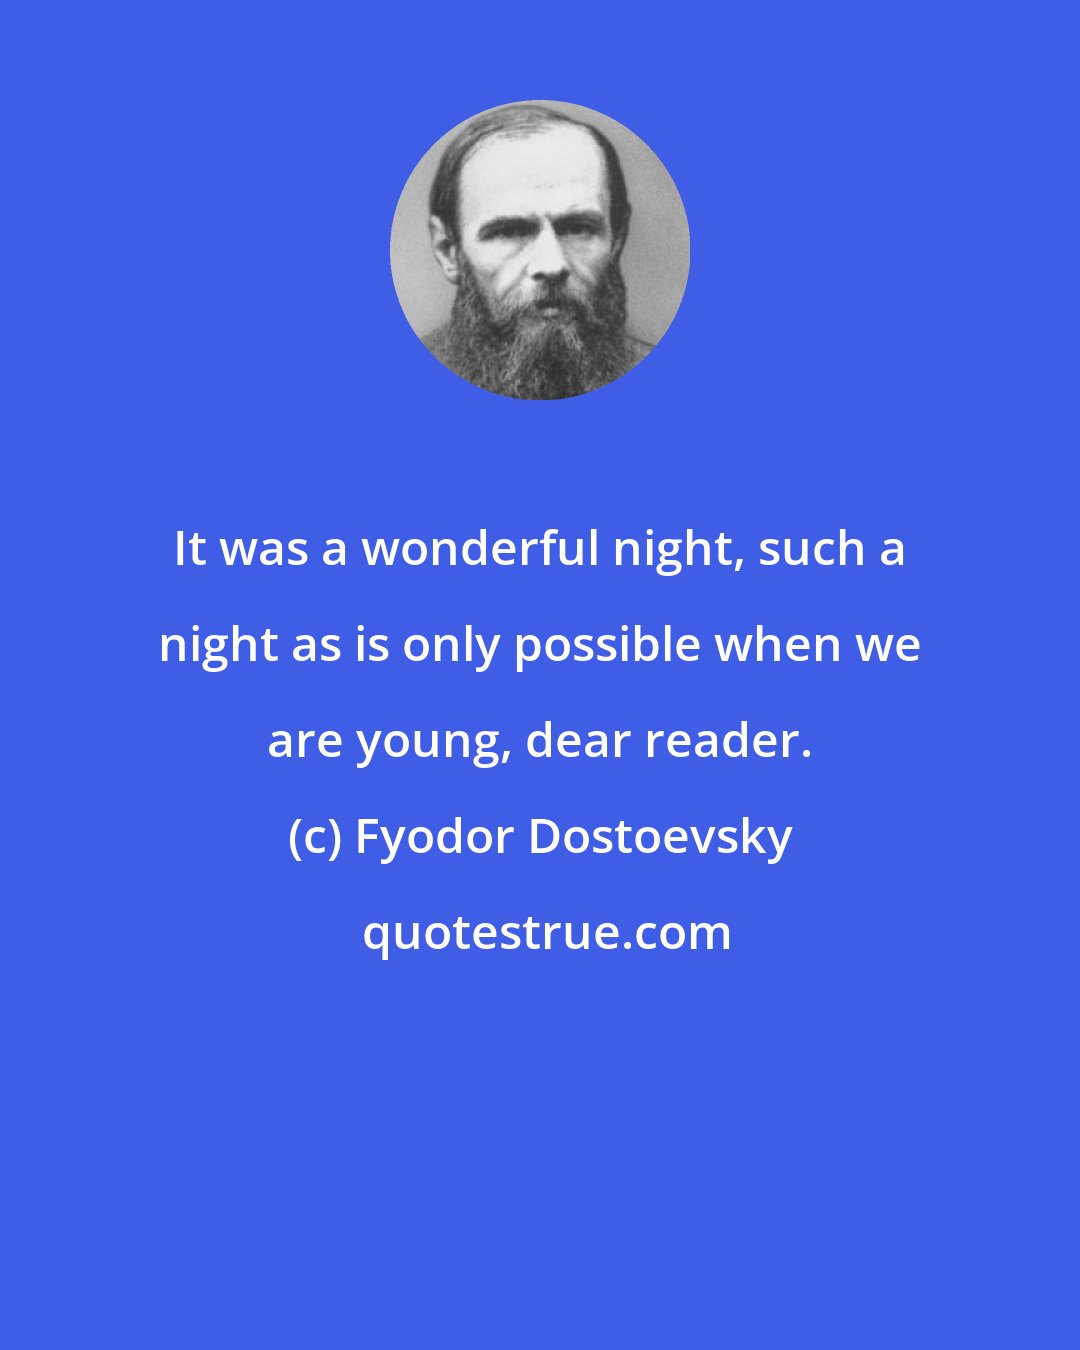 Fyodor Dostoevsky: It was a wonderful night, such a night as is only possible when we are young, dear reader.